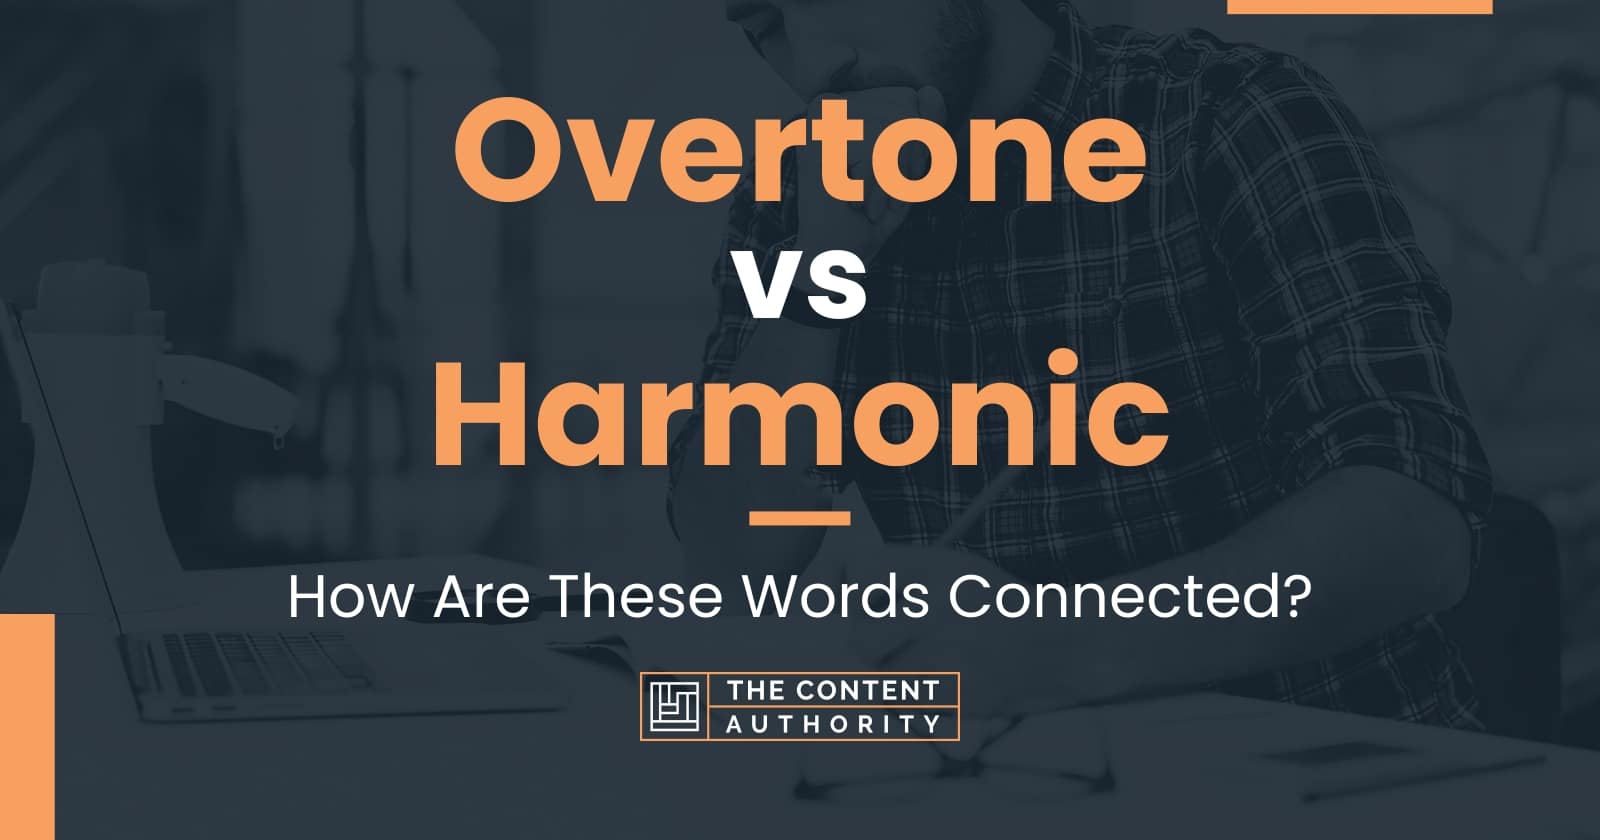 Overtone vs Harmonic: How Are These Words Connected?